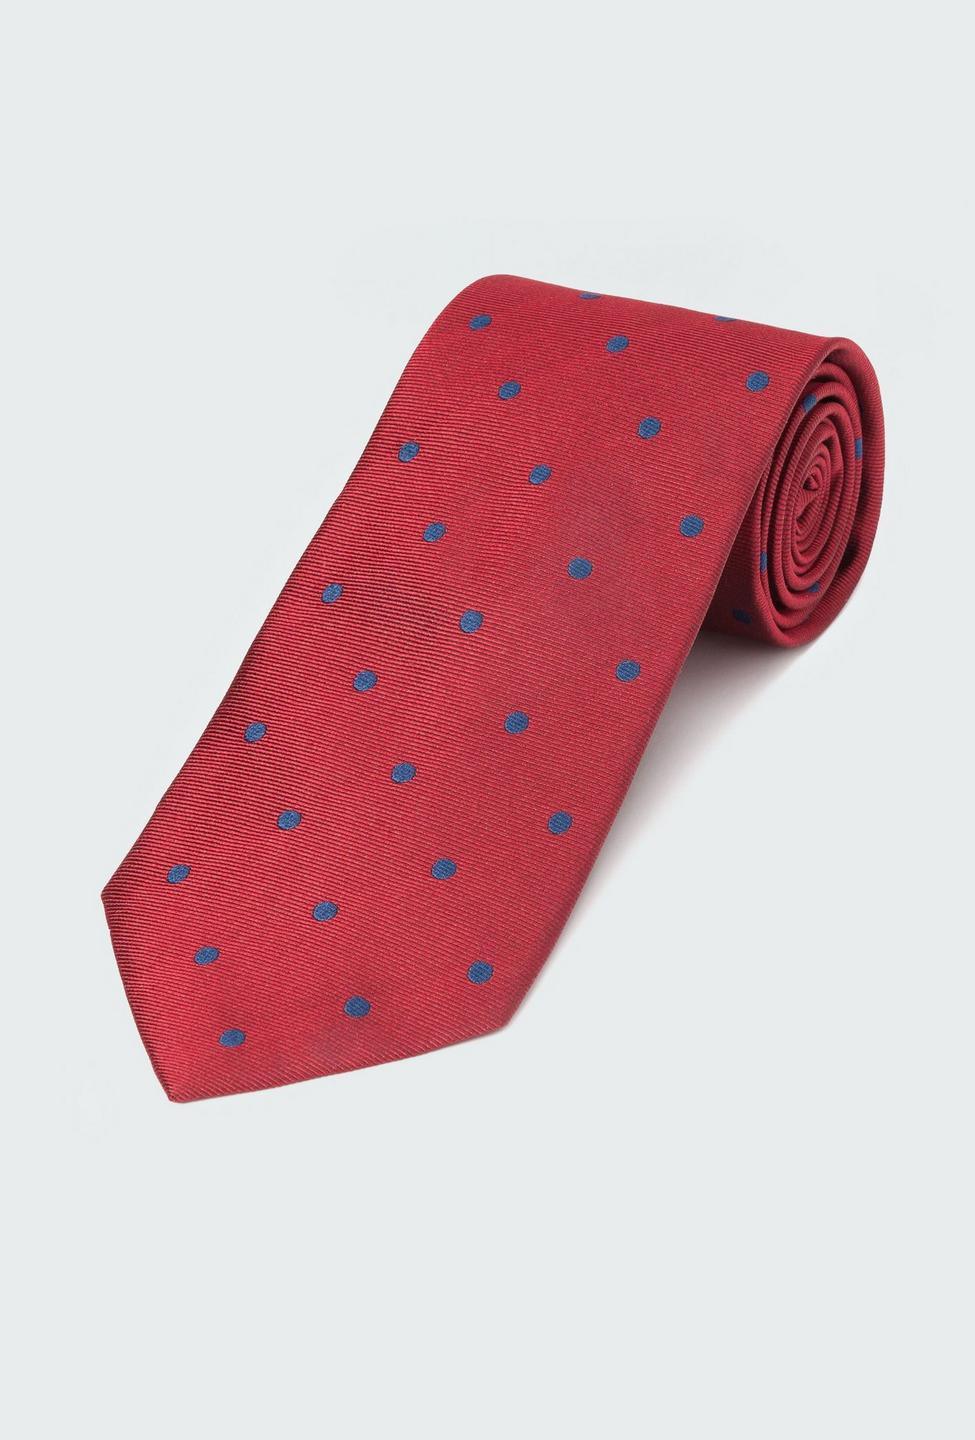 Red tie - Pattern Design from Indochino Collection